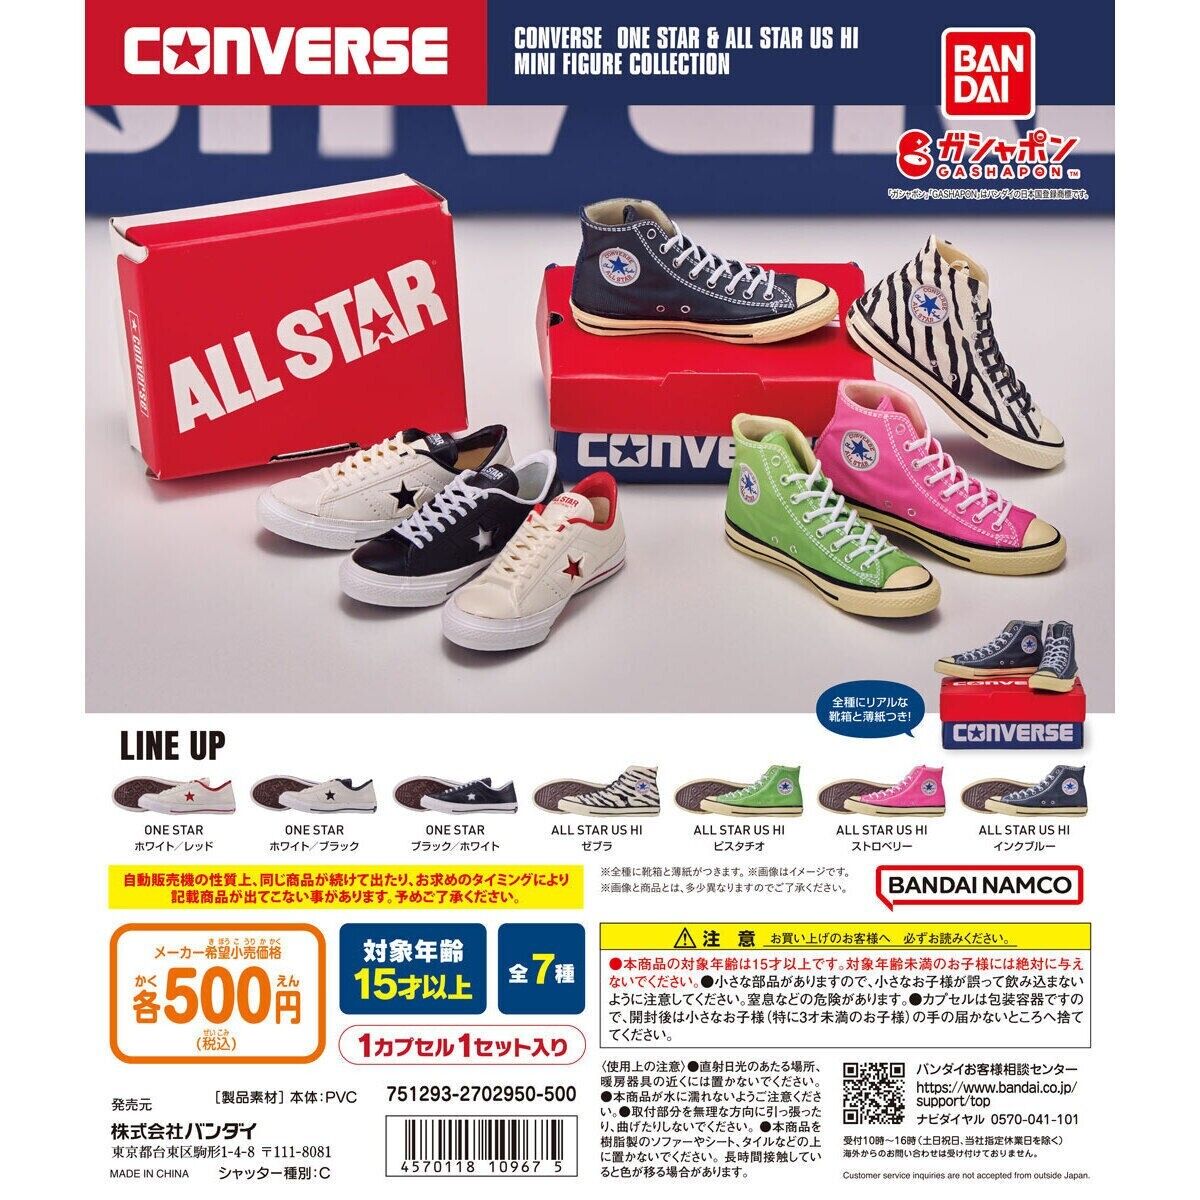 CONVERSE ONE STAR & ALL STAR US HI MINI FIGURE COLLECTION Total 7 types BANDAI